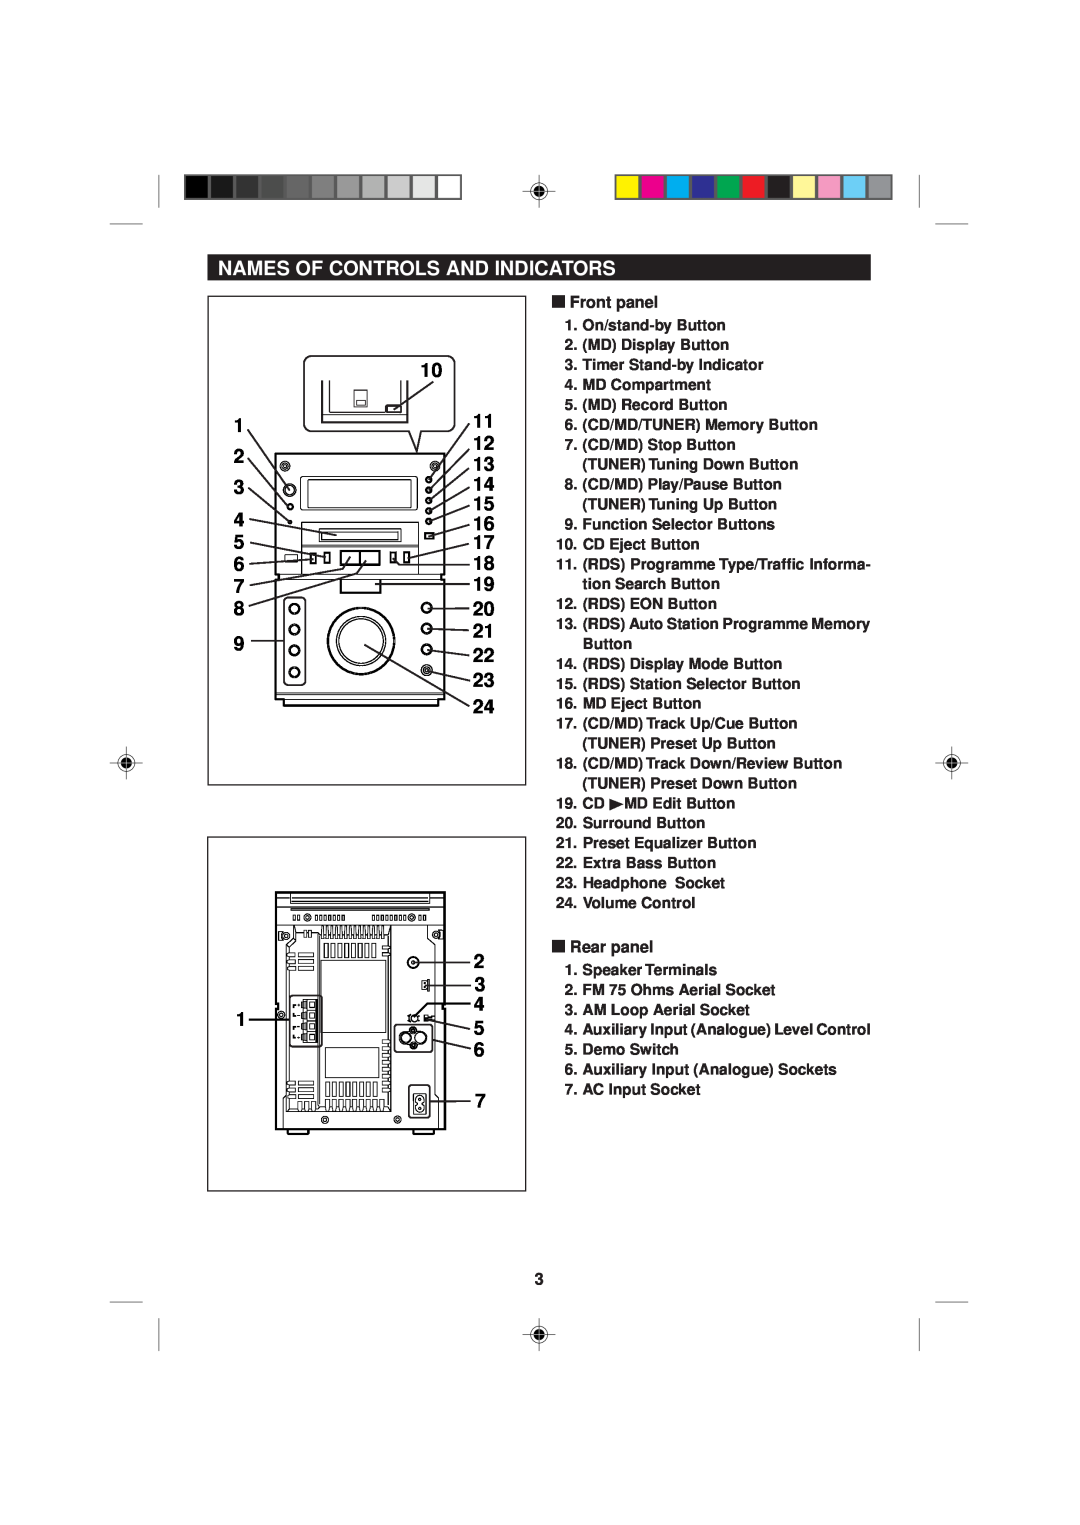 Sharp MD-M1H operation manual Names Of Controls And Indicators, Front panel, Rear panel 